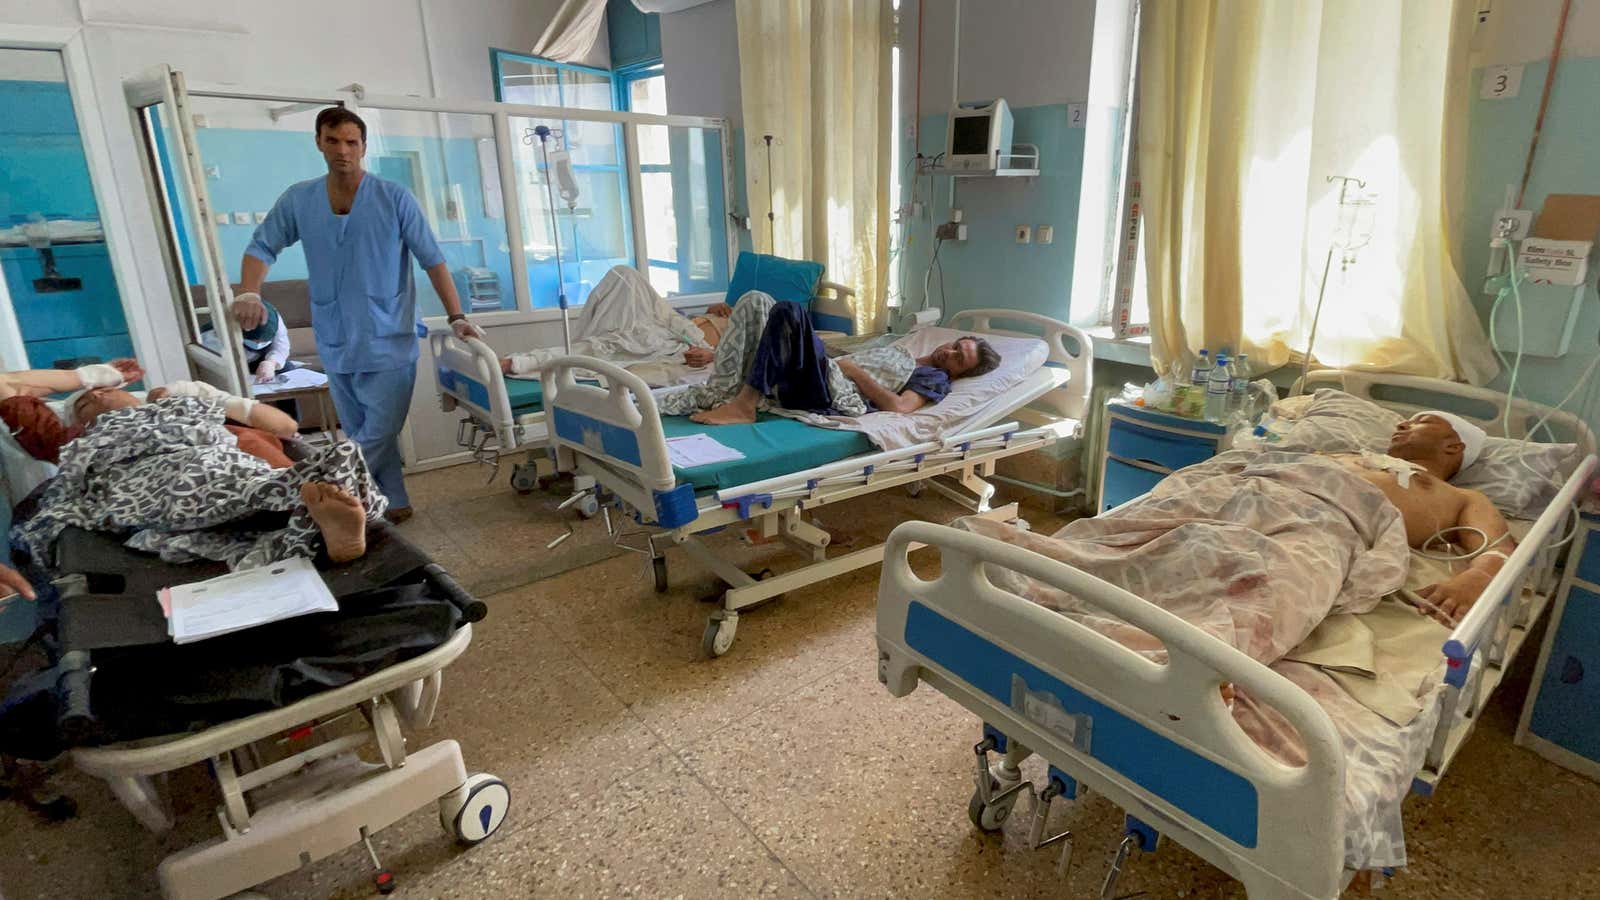 Afghanistan’s health system relies on foreign aid and humanitarian organizations.